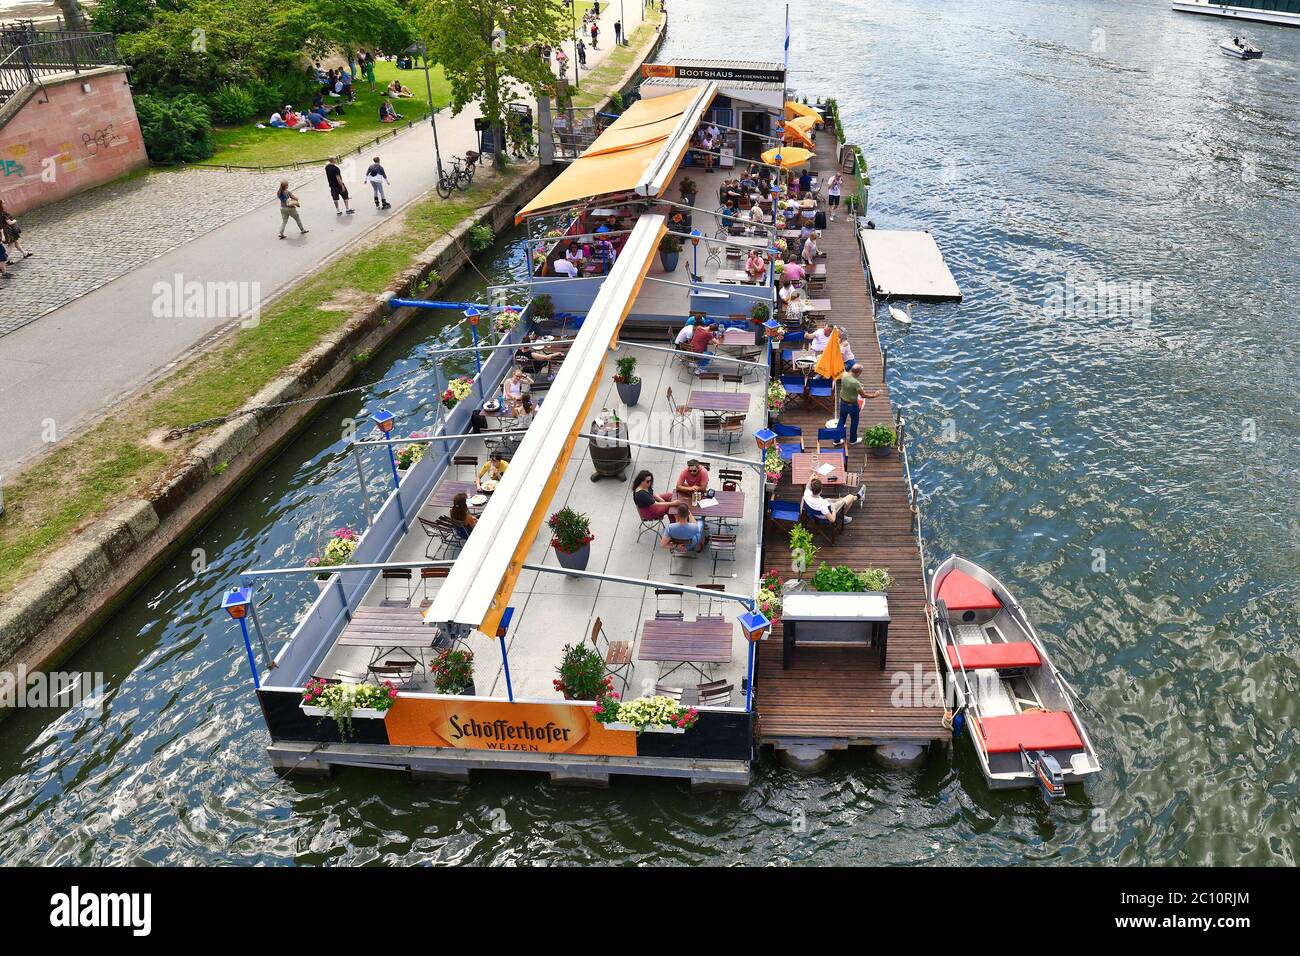 Frankfurt am Main, Germany - June 2020: Restaurant with tourists on a boat called 'Bootshaus' on Main river in Frankfurt Stock Photo